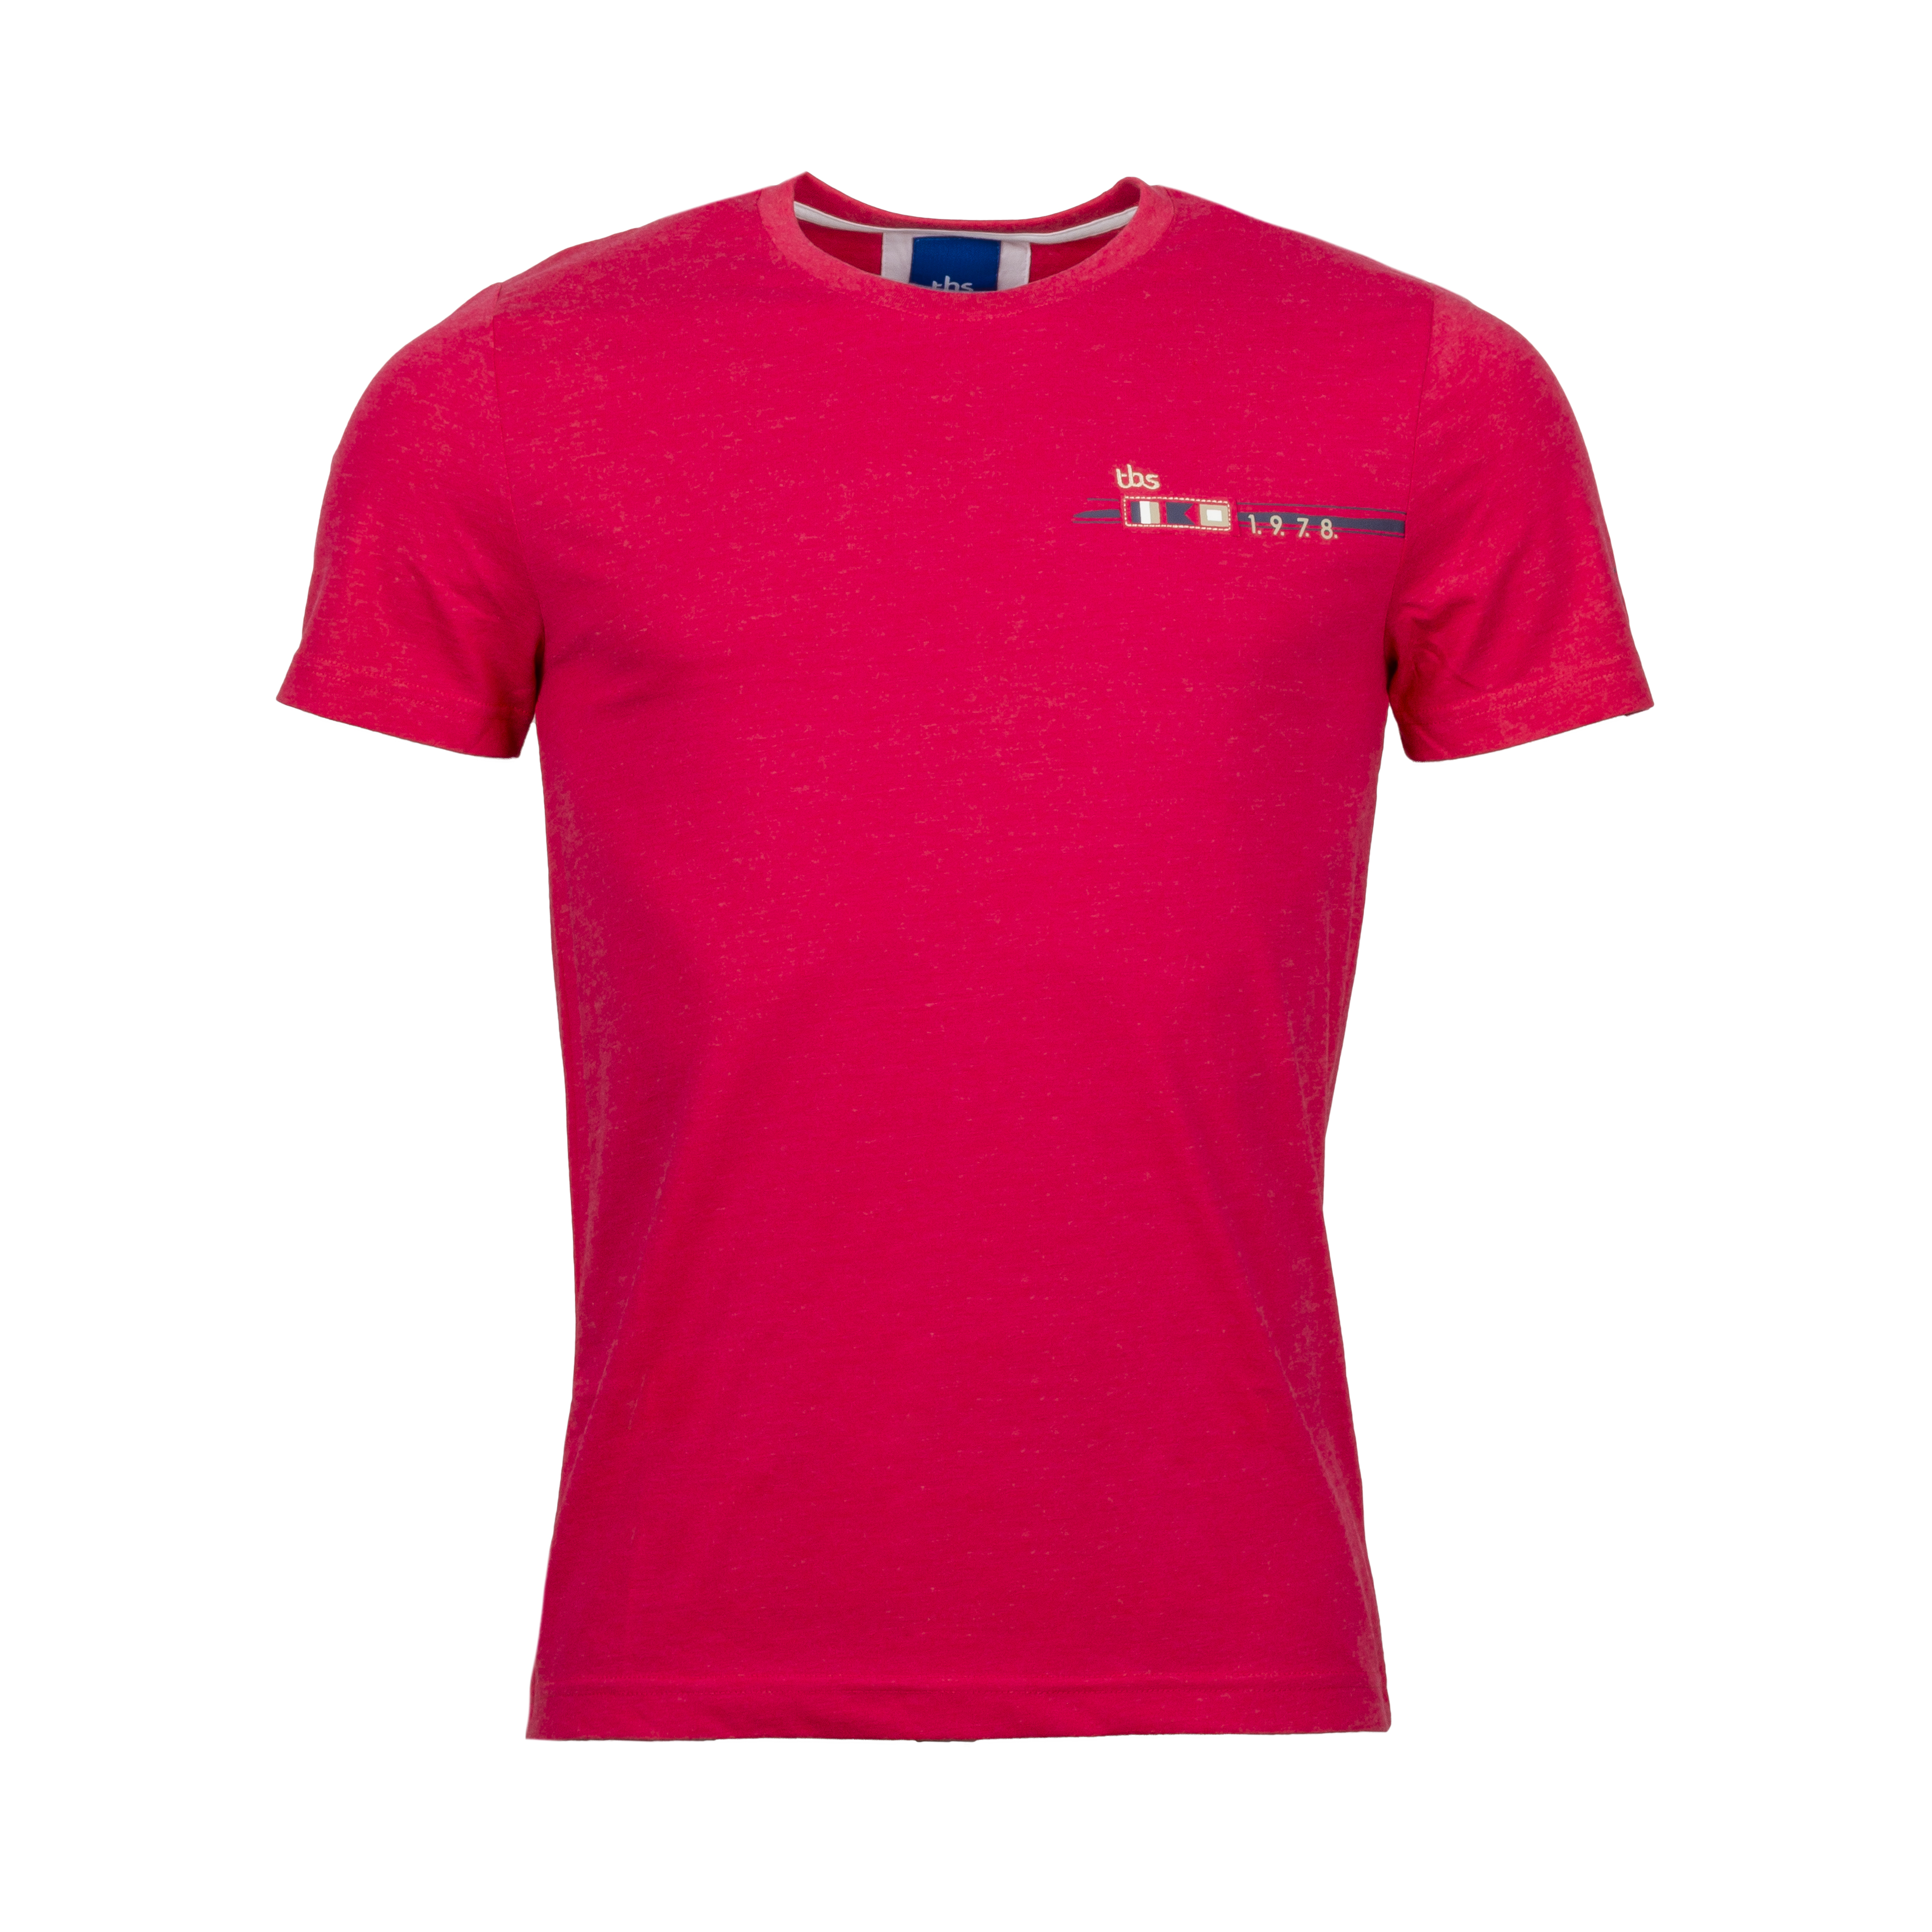 Tee-shirt col rond TBS Sionttee en coton rose